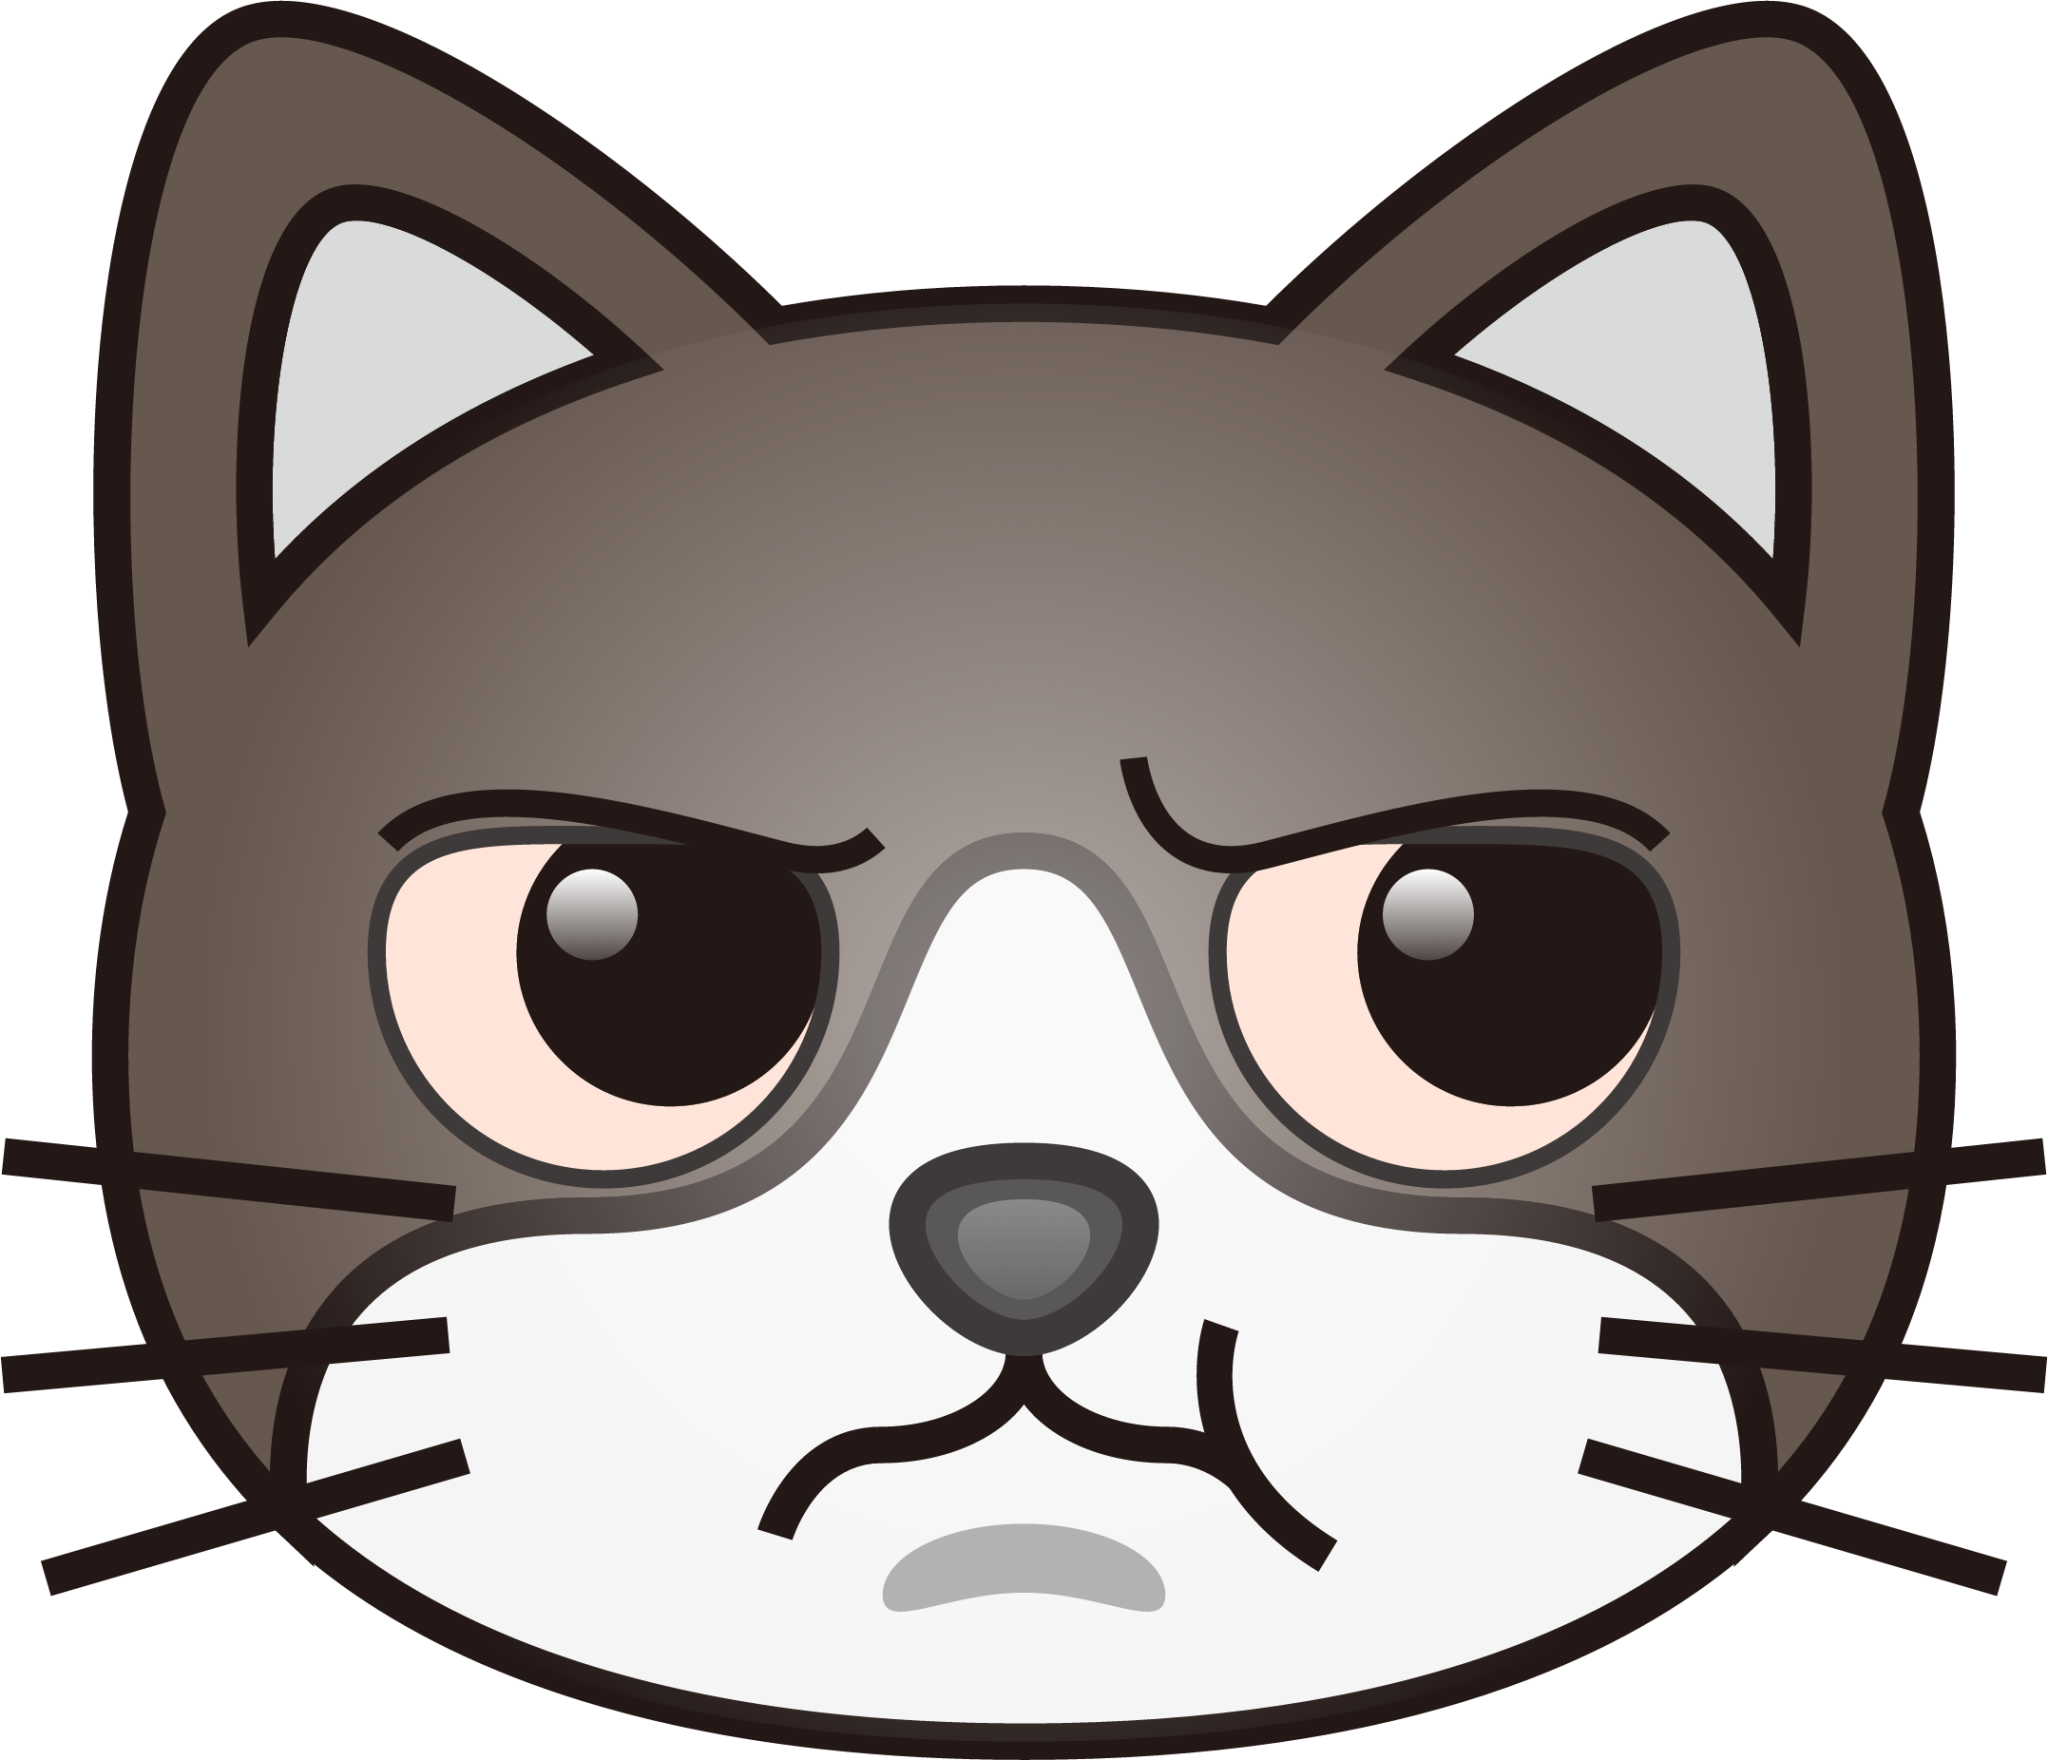 Cat, emoji, expression, pout, pouting, scowling, unhappy icon - Download on  Iconfinder